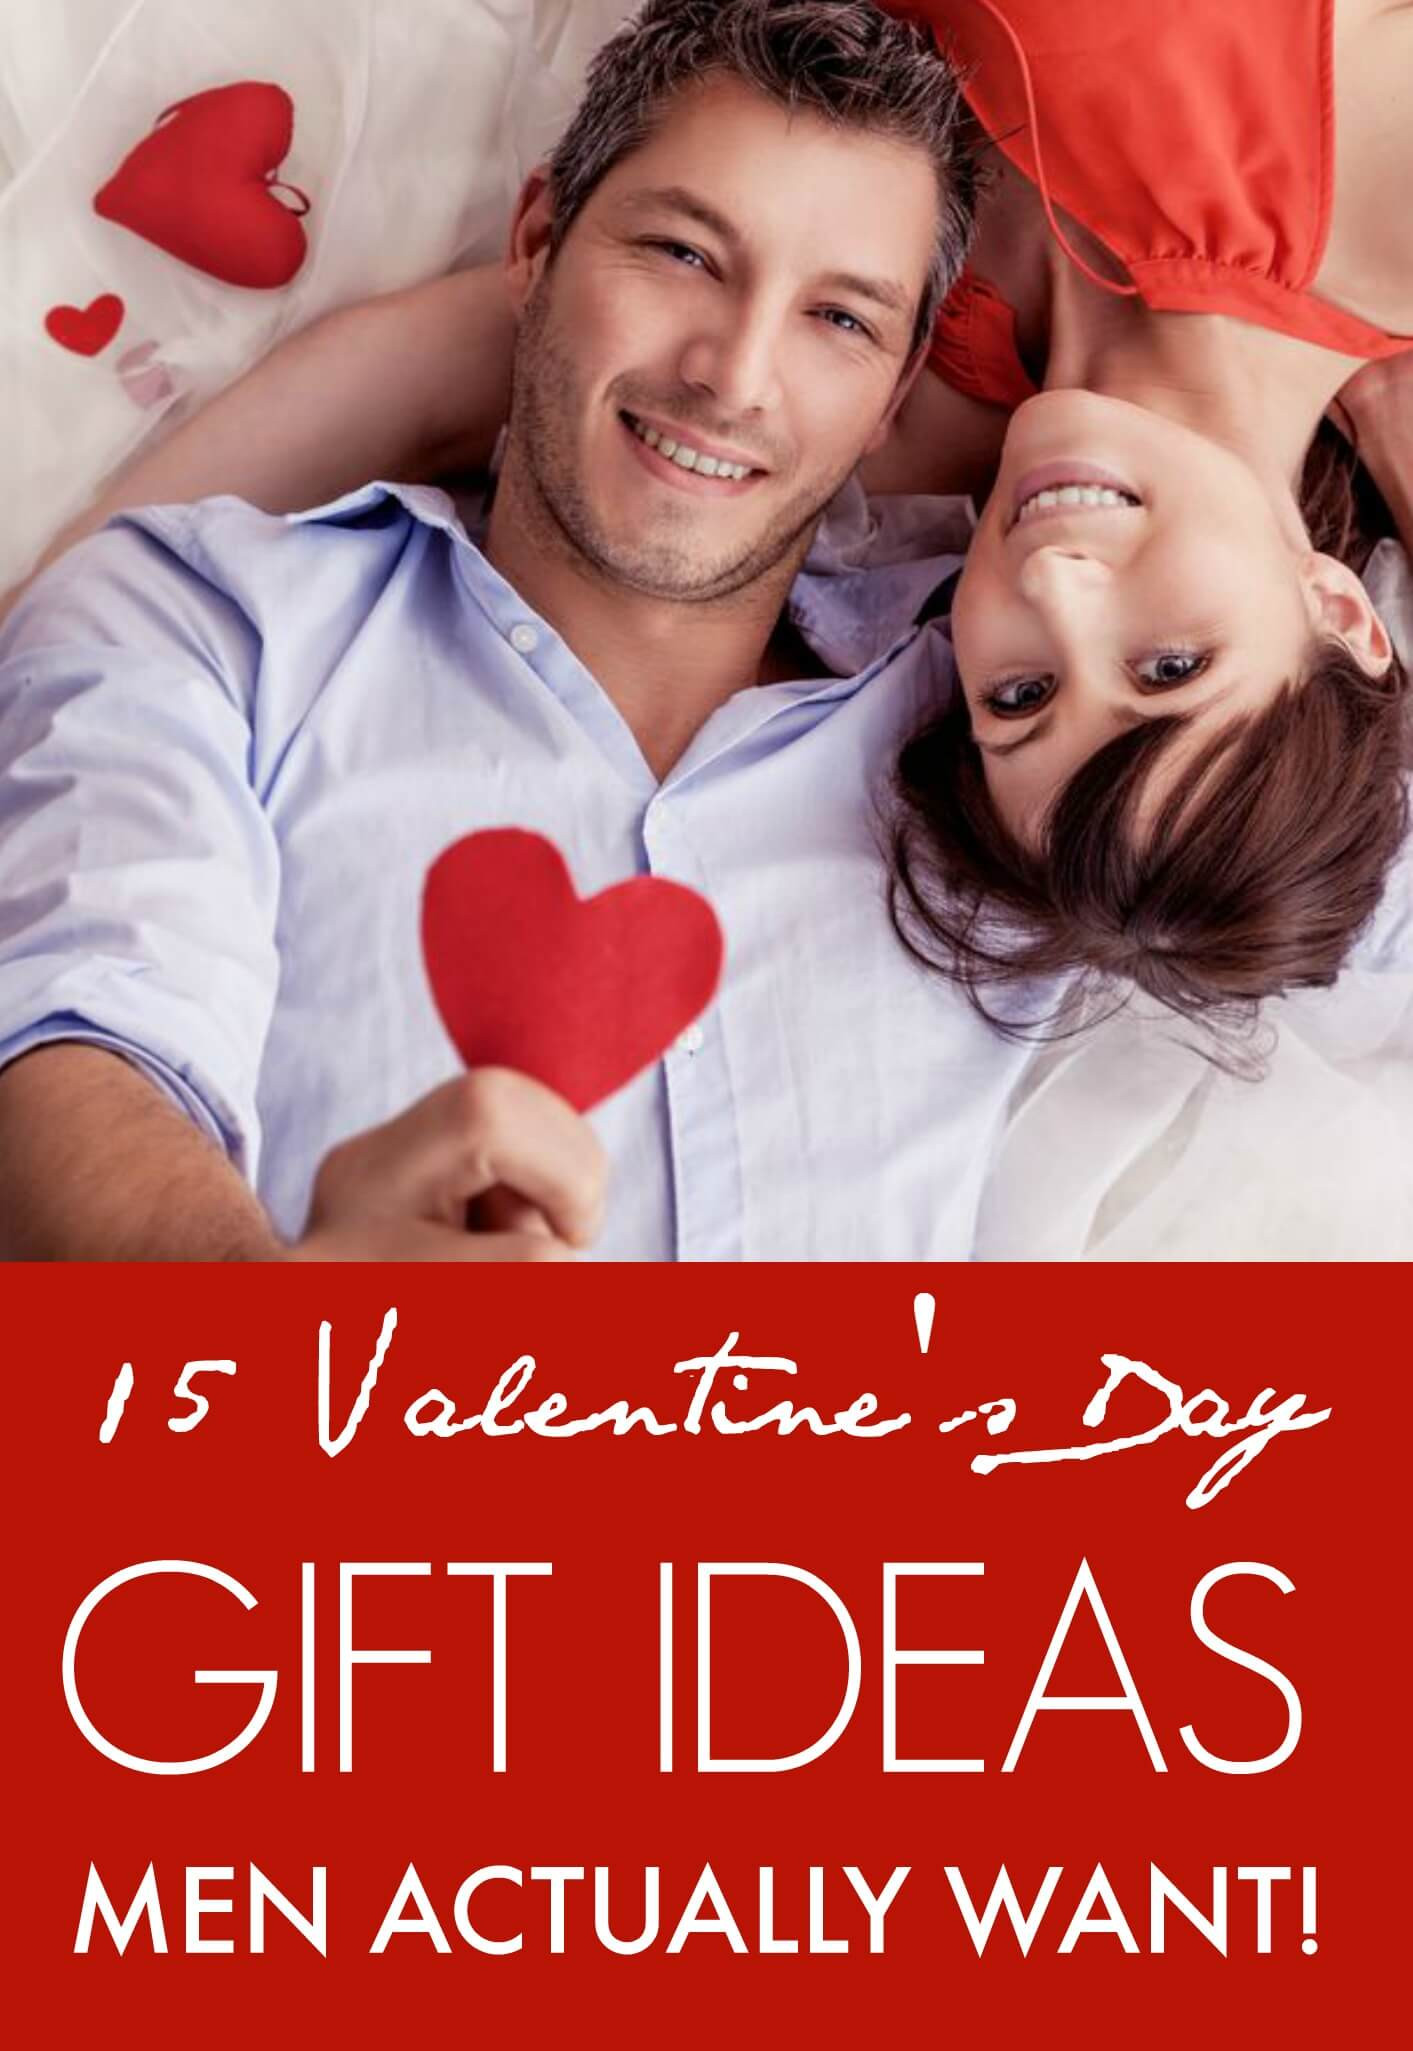 Men Valentines Day Gifts
 15 Valentine’s Day Gift ideas Men Actually Want